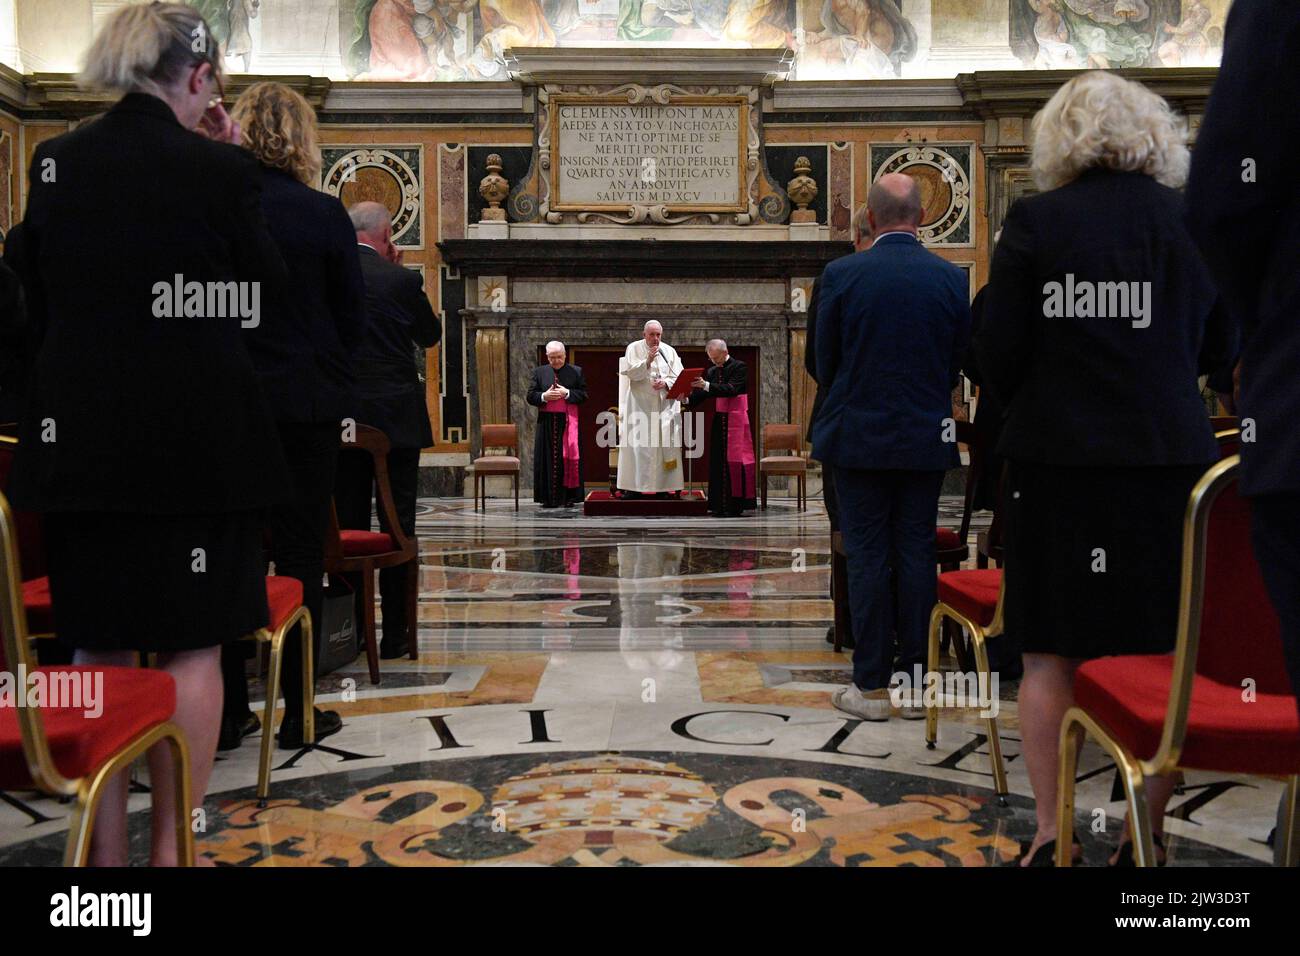 Vatican, Vatican. 02nd Sep, 2022. Italy, Rome, Vatican, 2022/09/02 Pope Francis received in Audience this morning the Members of the Alumni Association of the 'Kollegium Kalksburg' in Vienna at the Vatican . Photograph by Vatican Mediia/Catholic Press Photo. RESTRICTED TO EDITORIAL USE - NO MARKETING - NO ADVERTISING CAMPAIGNS. Credit: Independent Photo Agency/Alamy Live News Stock Photo